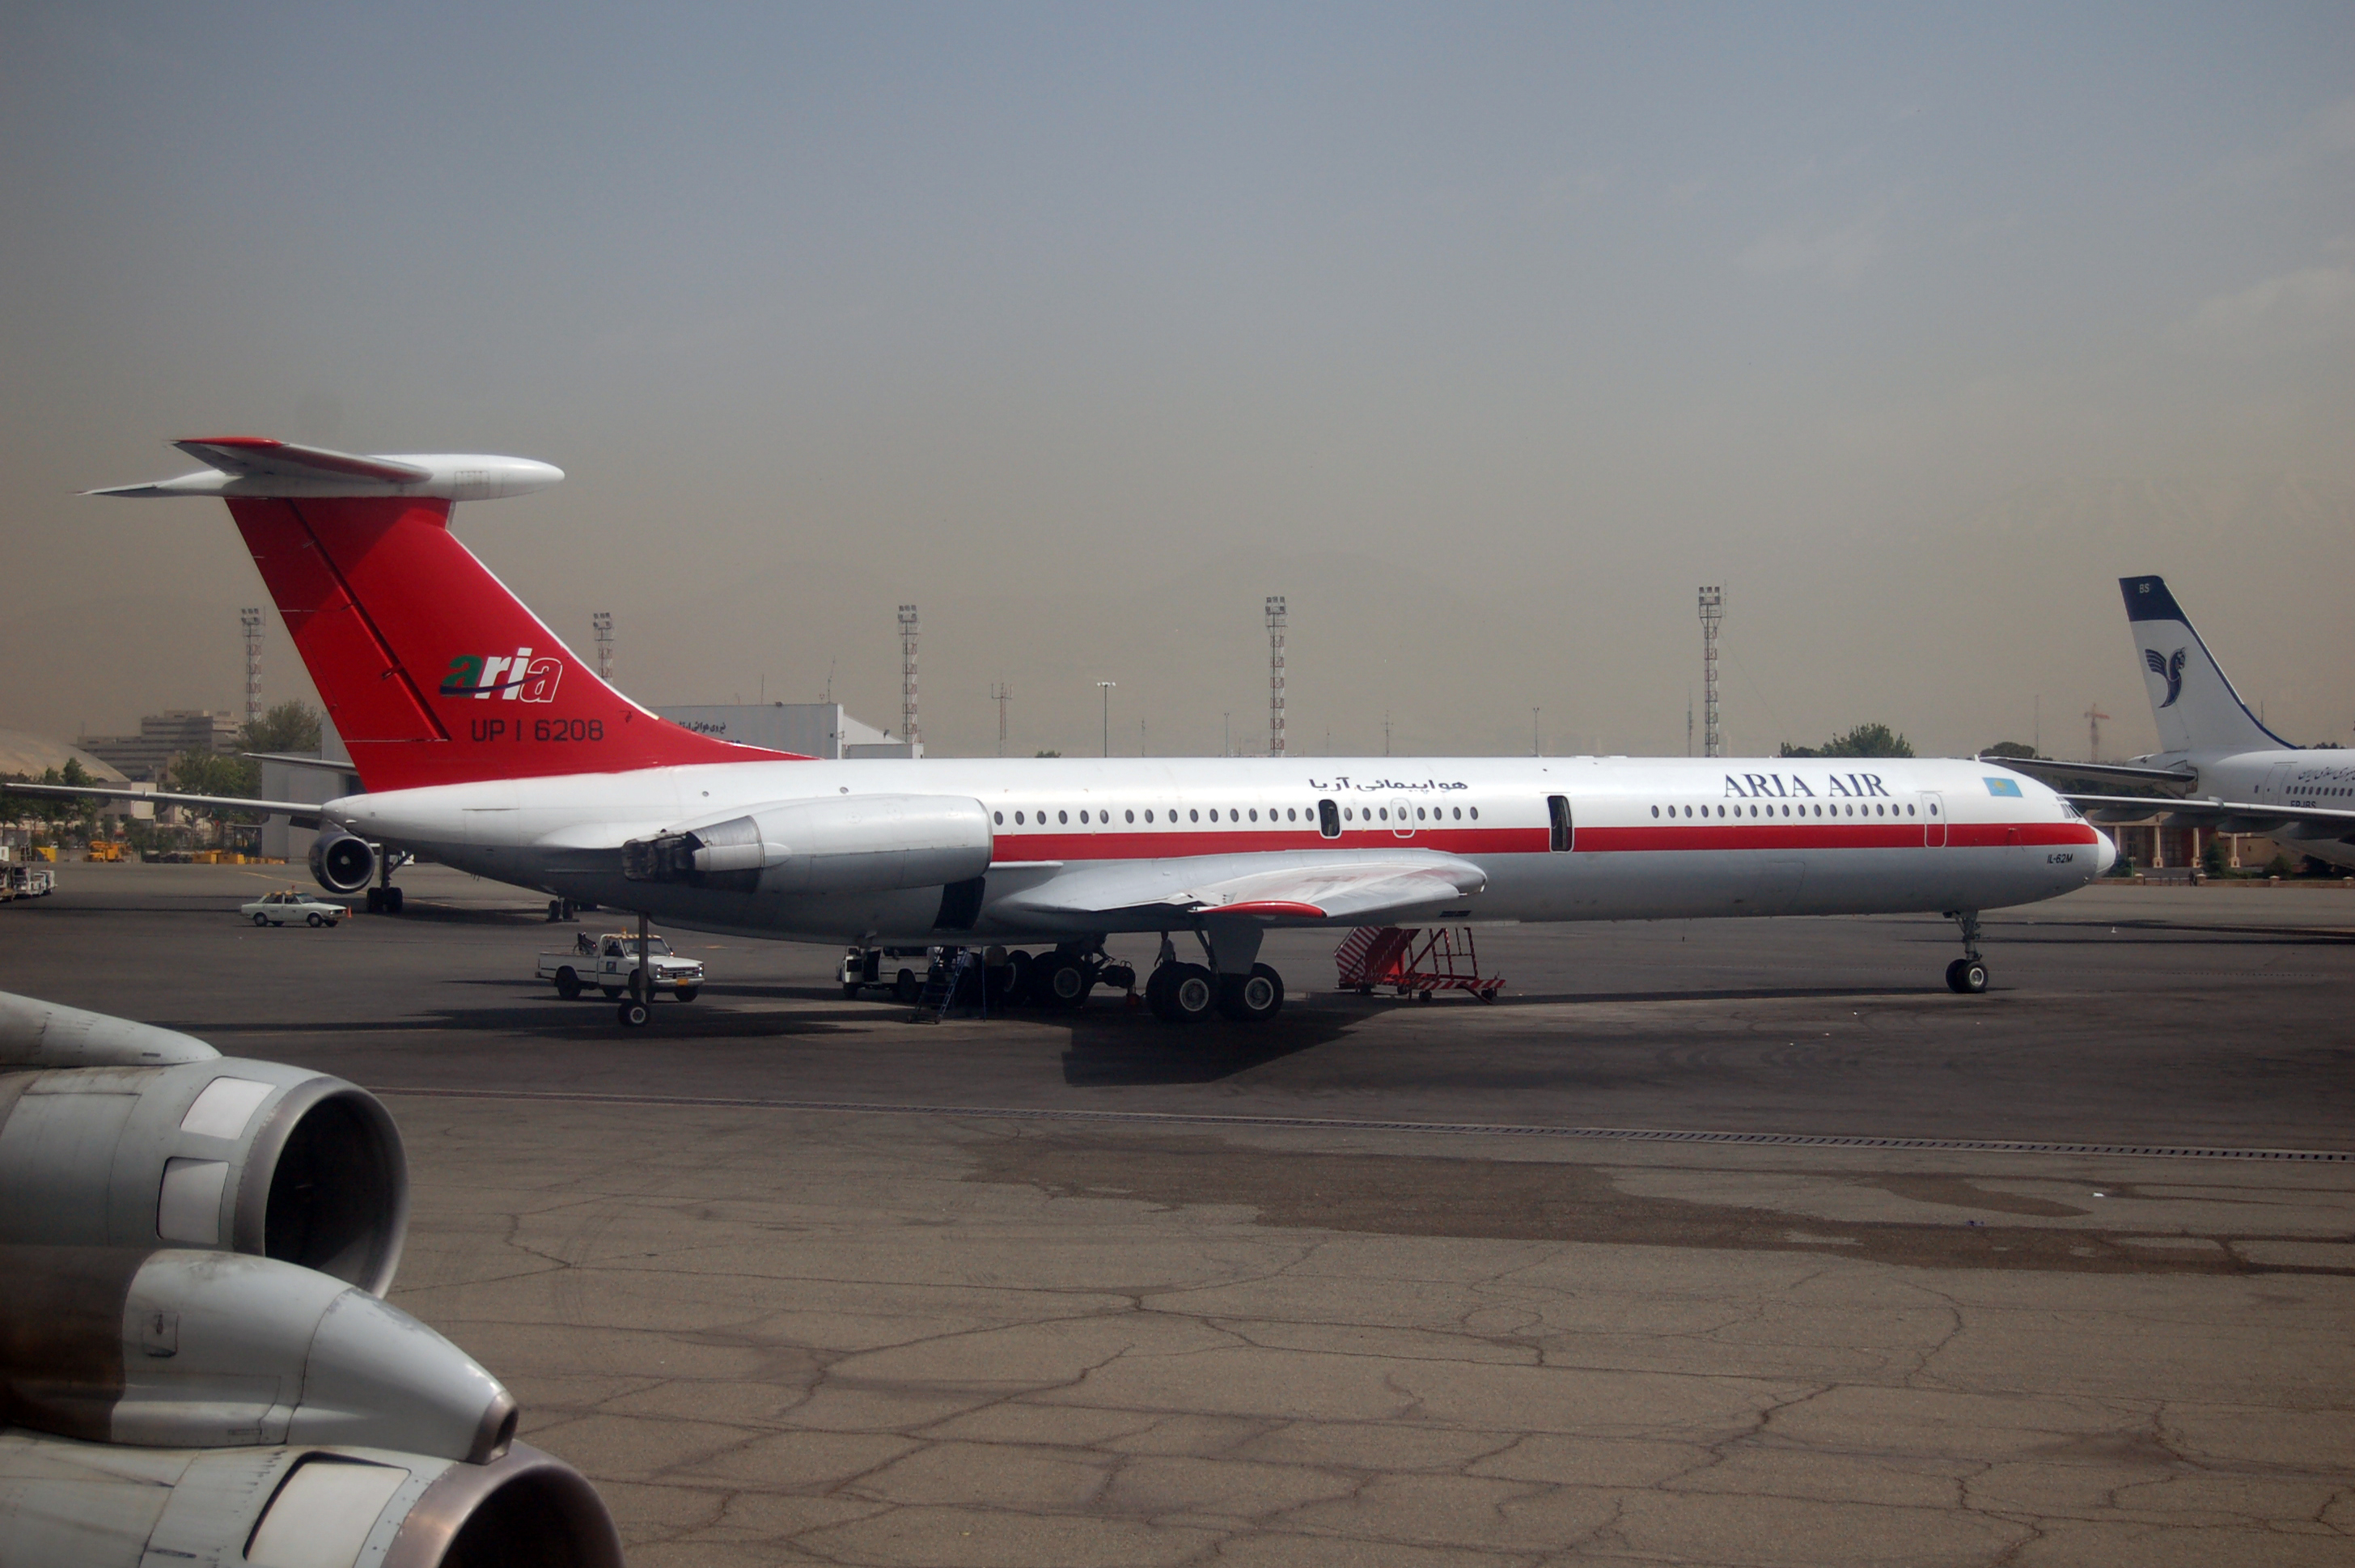 A tragic bird, UP-i6208 of Aria Air crashed in Mashhad on July 24 2009, two  months after this picture was taken Guy Van Herbruggen 